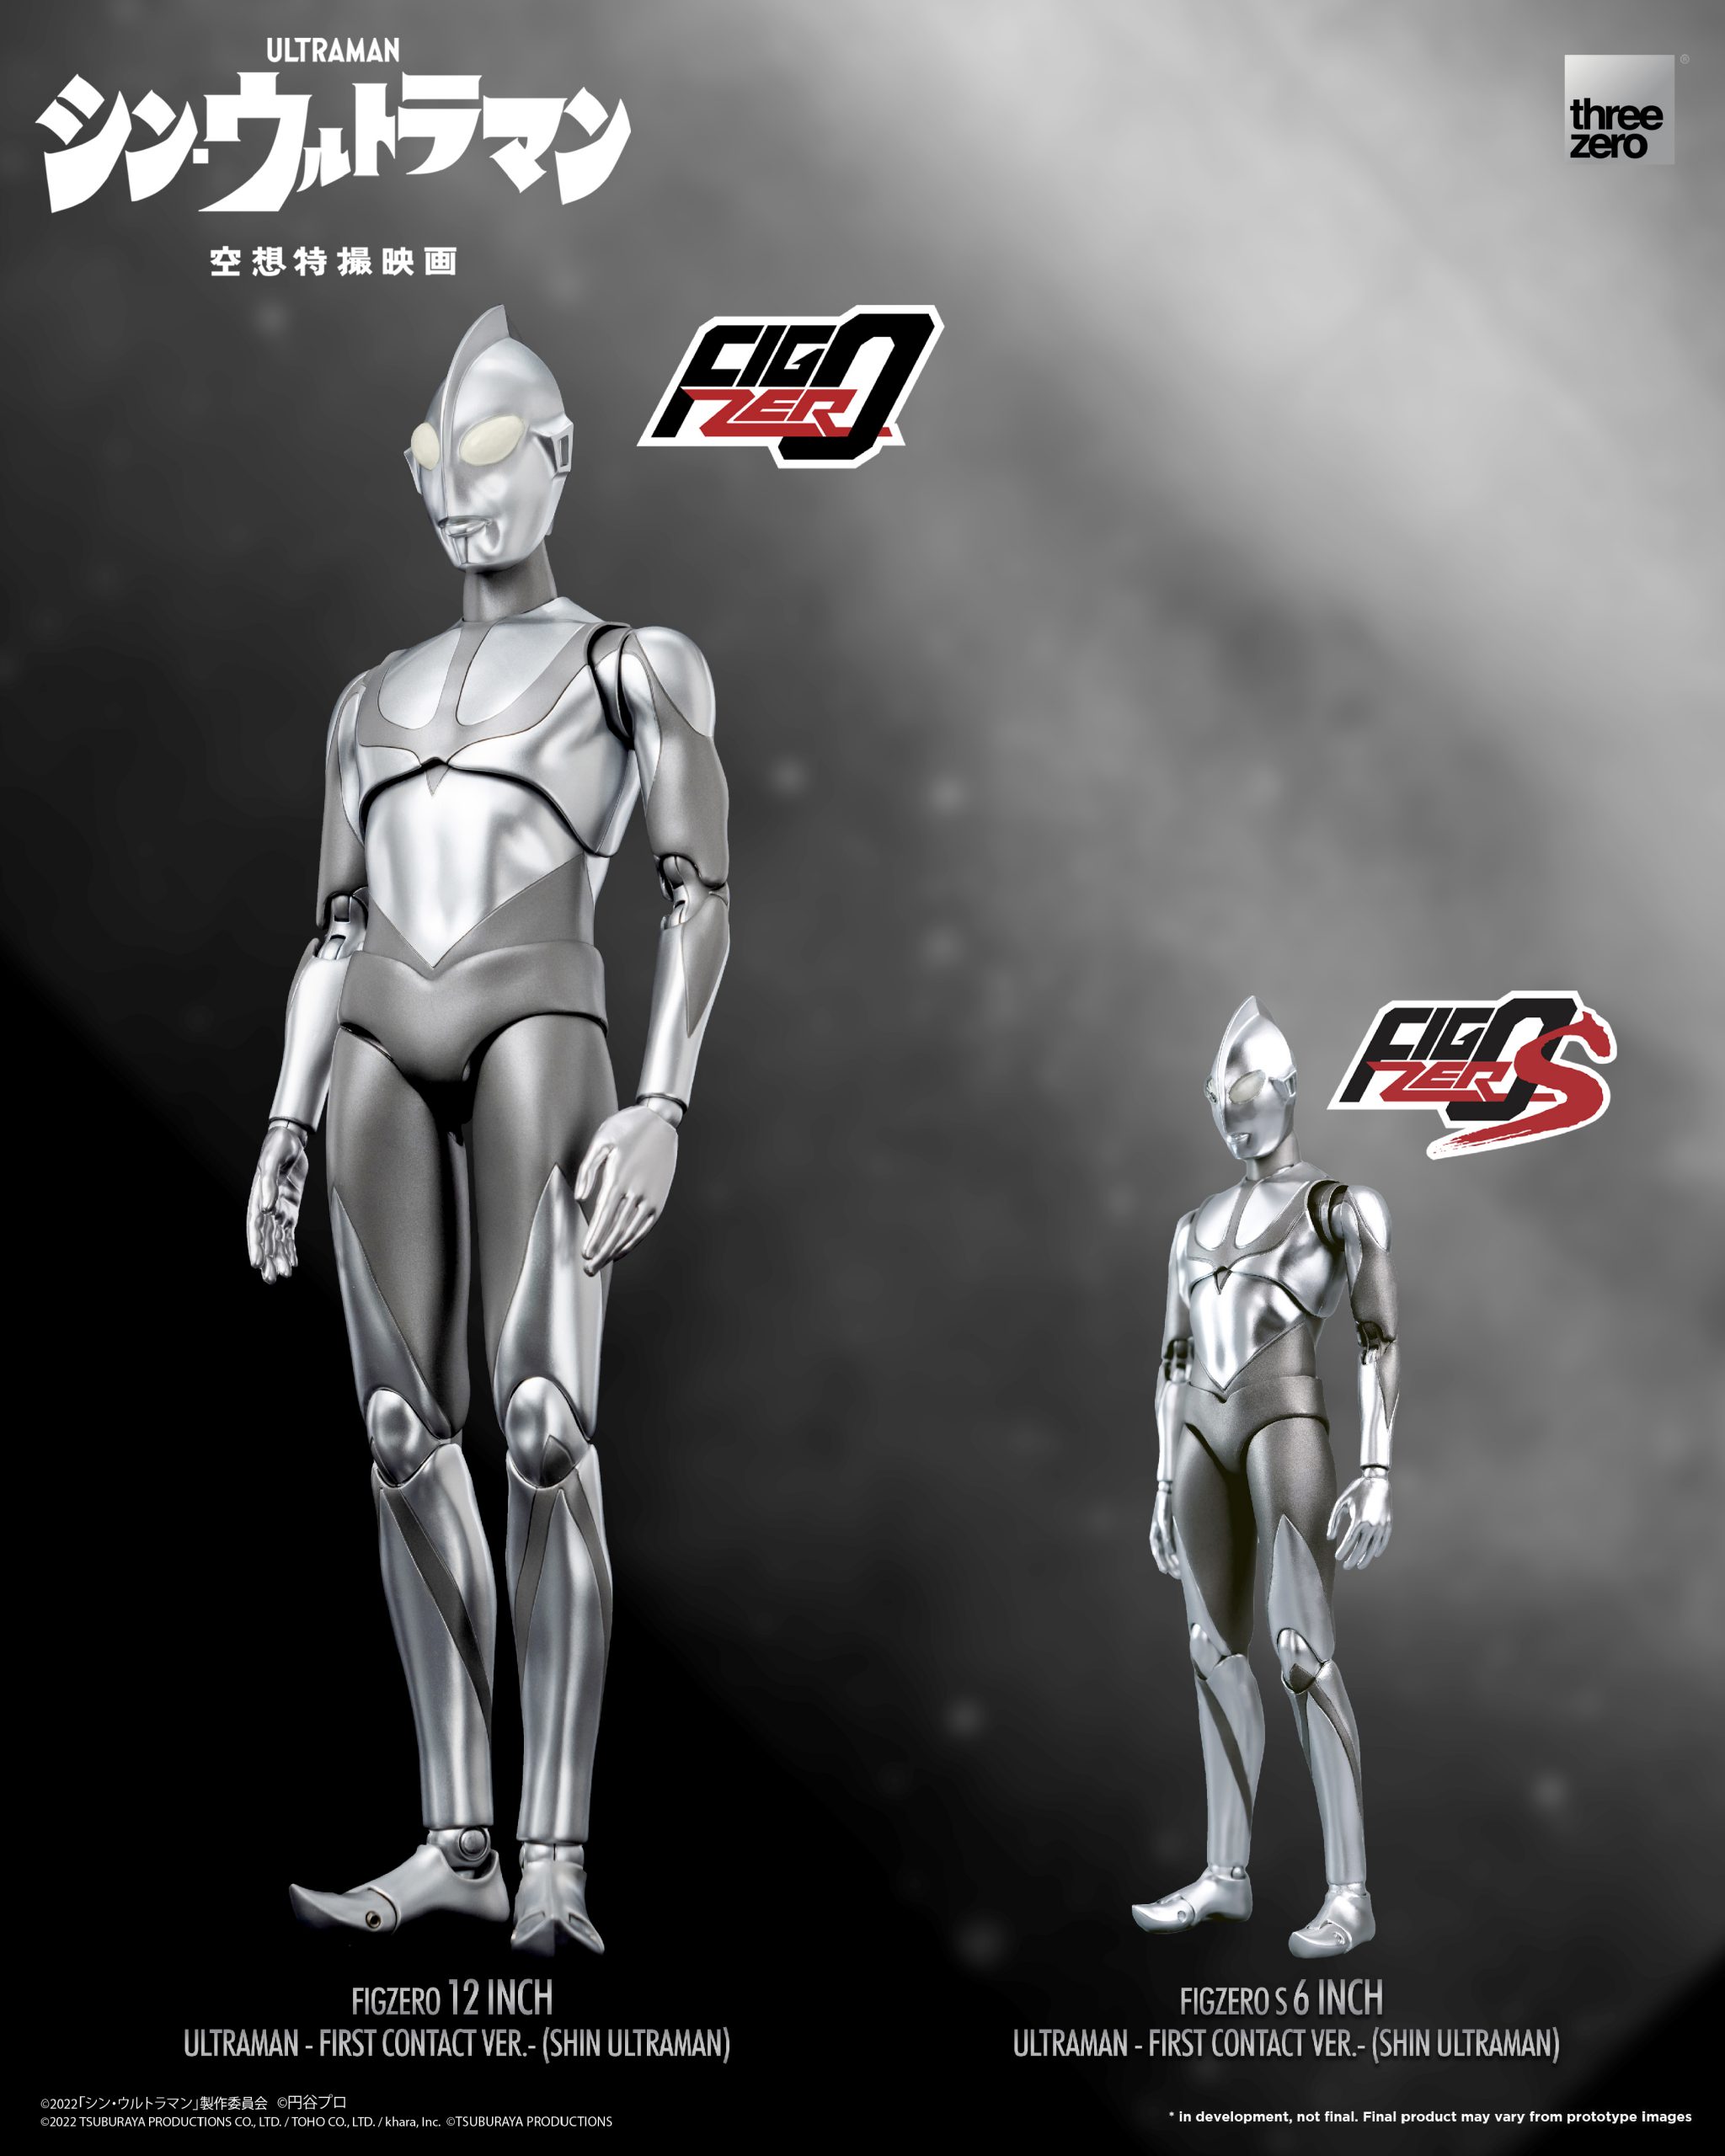 From the SHIN ULTRAMAN live-action film, both FigZero S 6 inch Ultraman  -First Contact Ver.- (SHIN ULTRAMAN) and FigZero 12 inch Ultraman -First  Contact Ver.- (SHIN ULTRAMAN) are currently on pre-order at